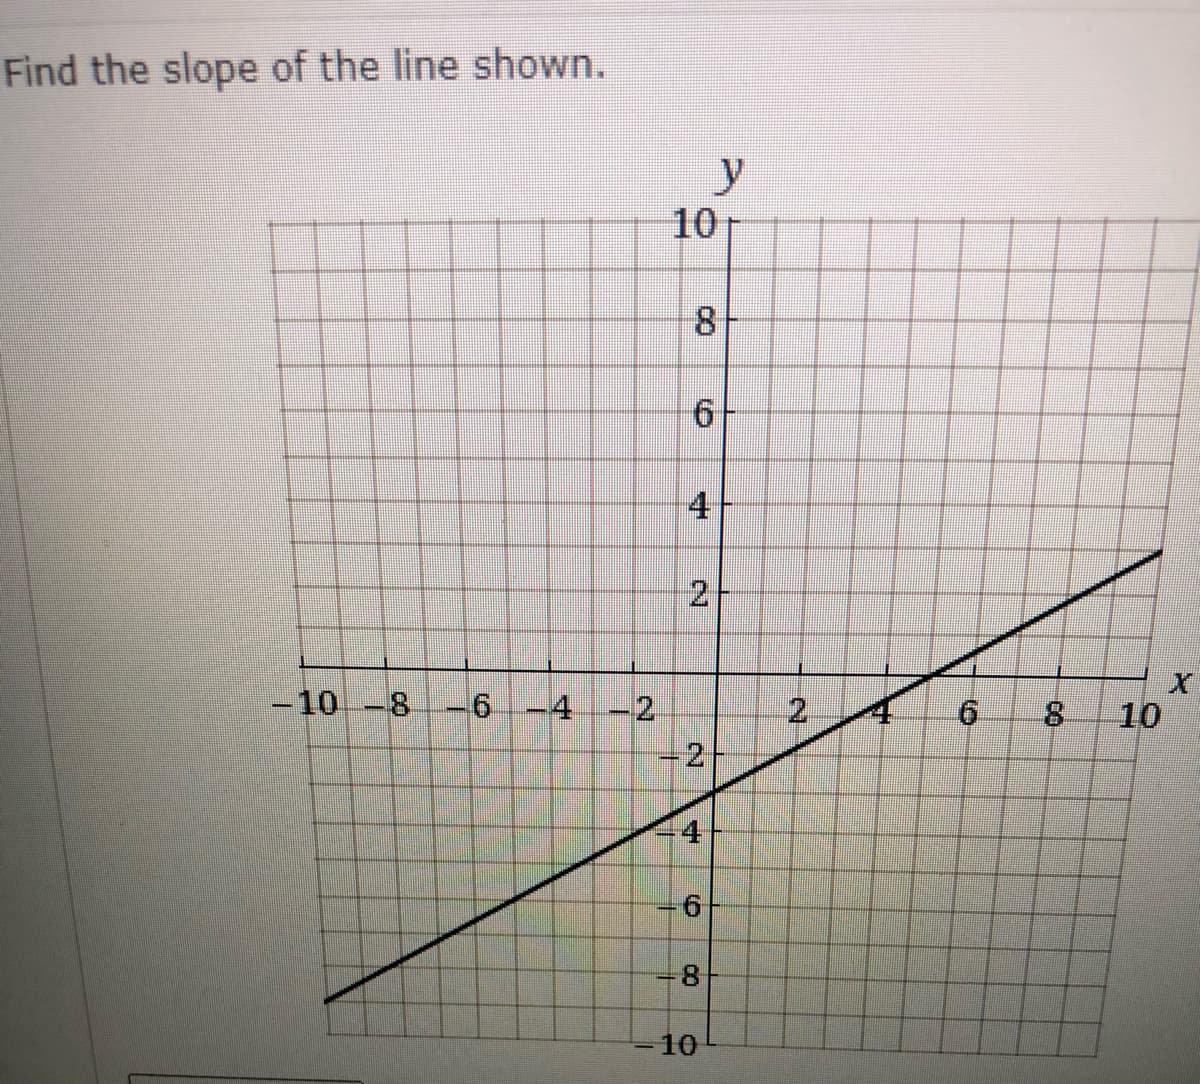 Find the slope of the line shown.
y
10
8.
9.
4
-10-8-6-4
-2
8.
10
4
8.
-10
2.
2.
2.
